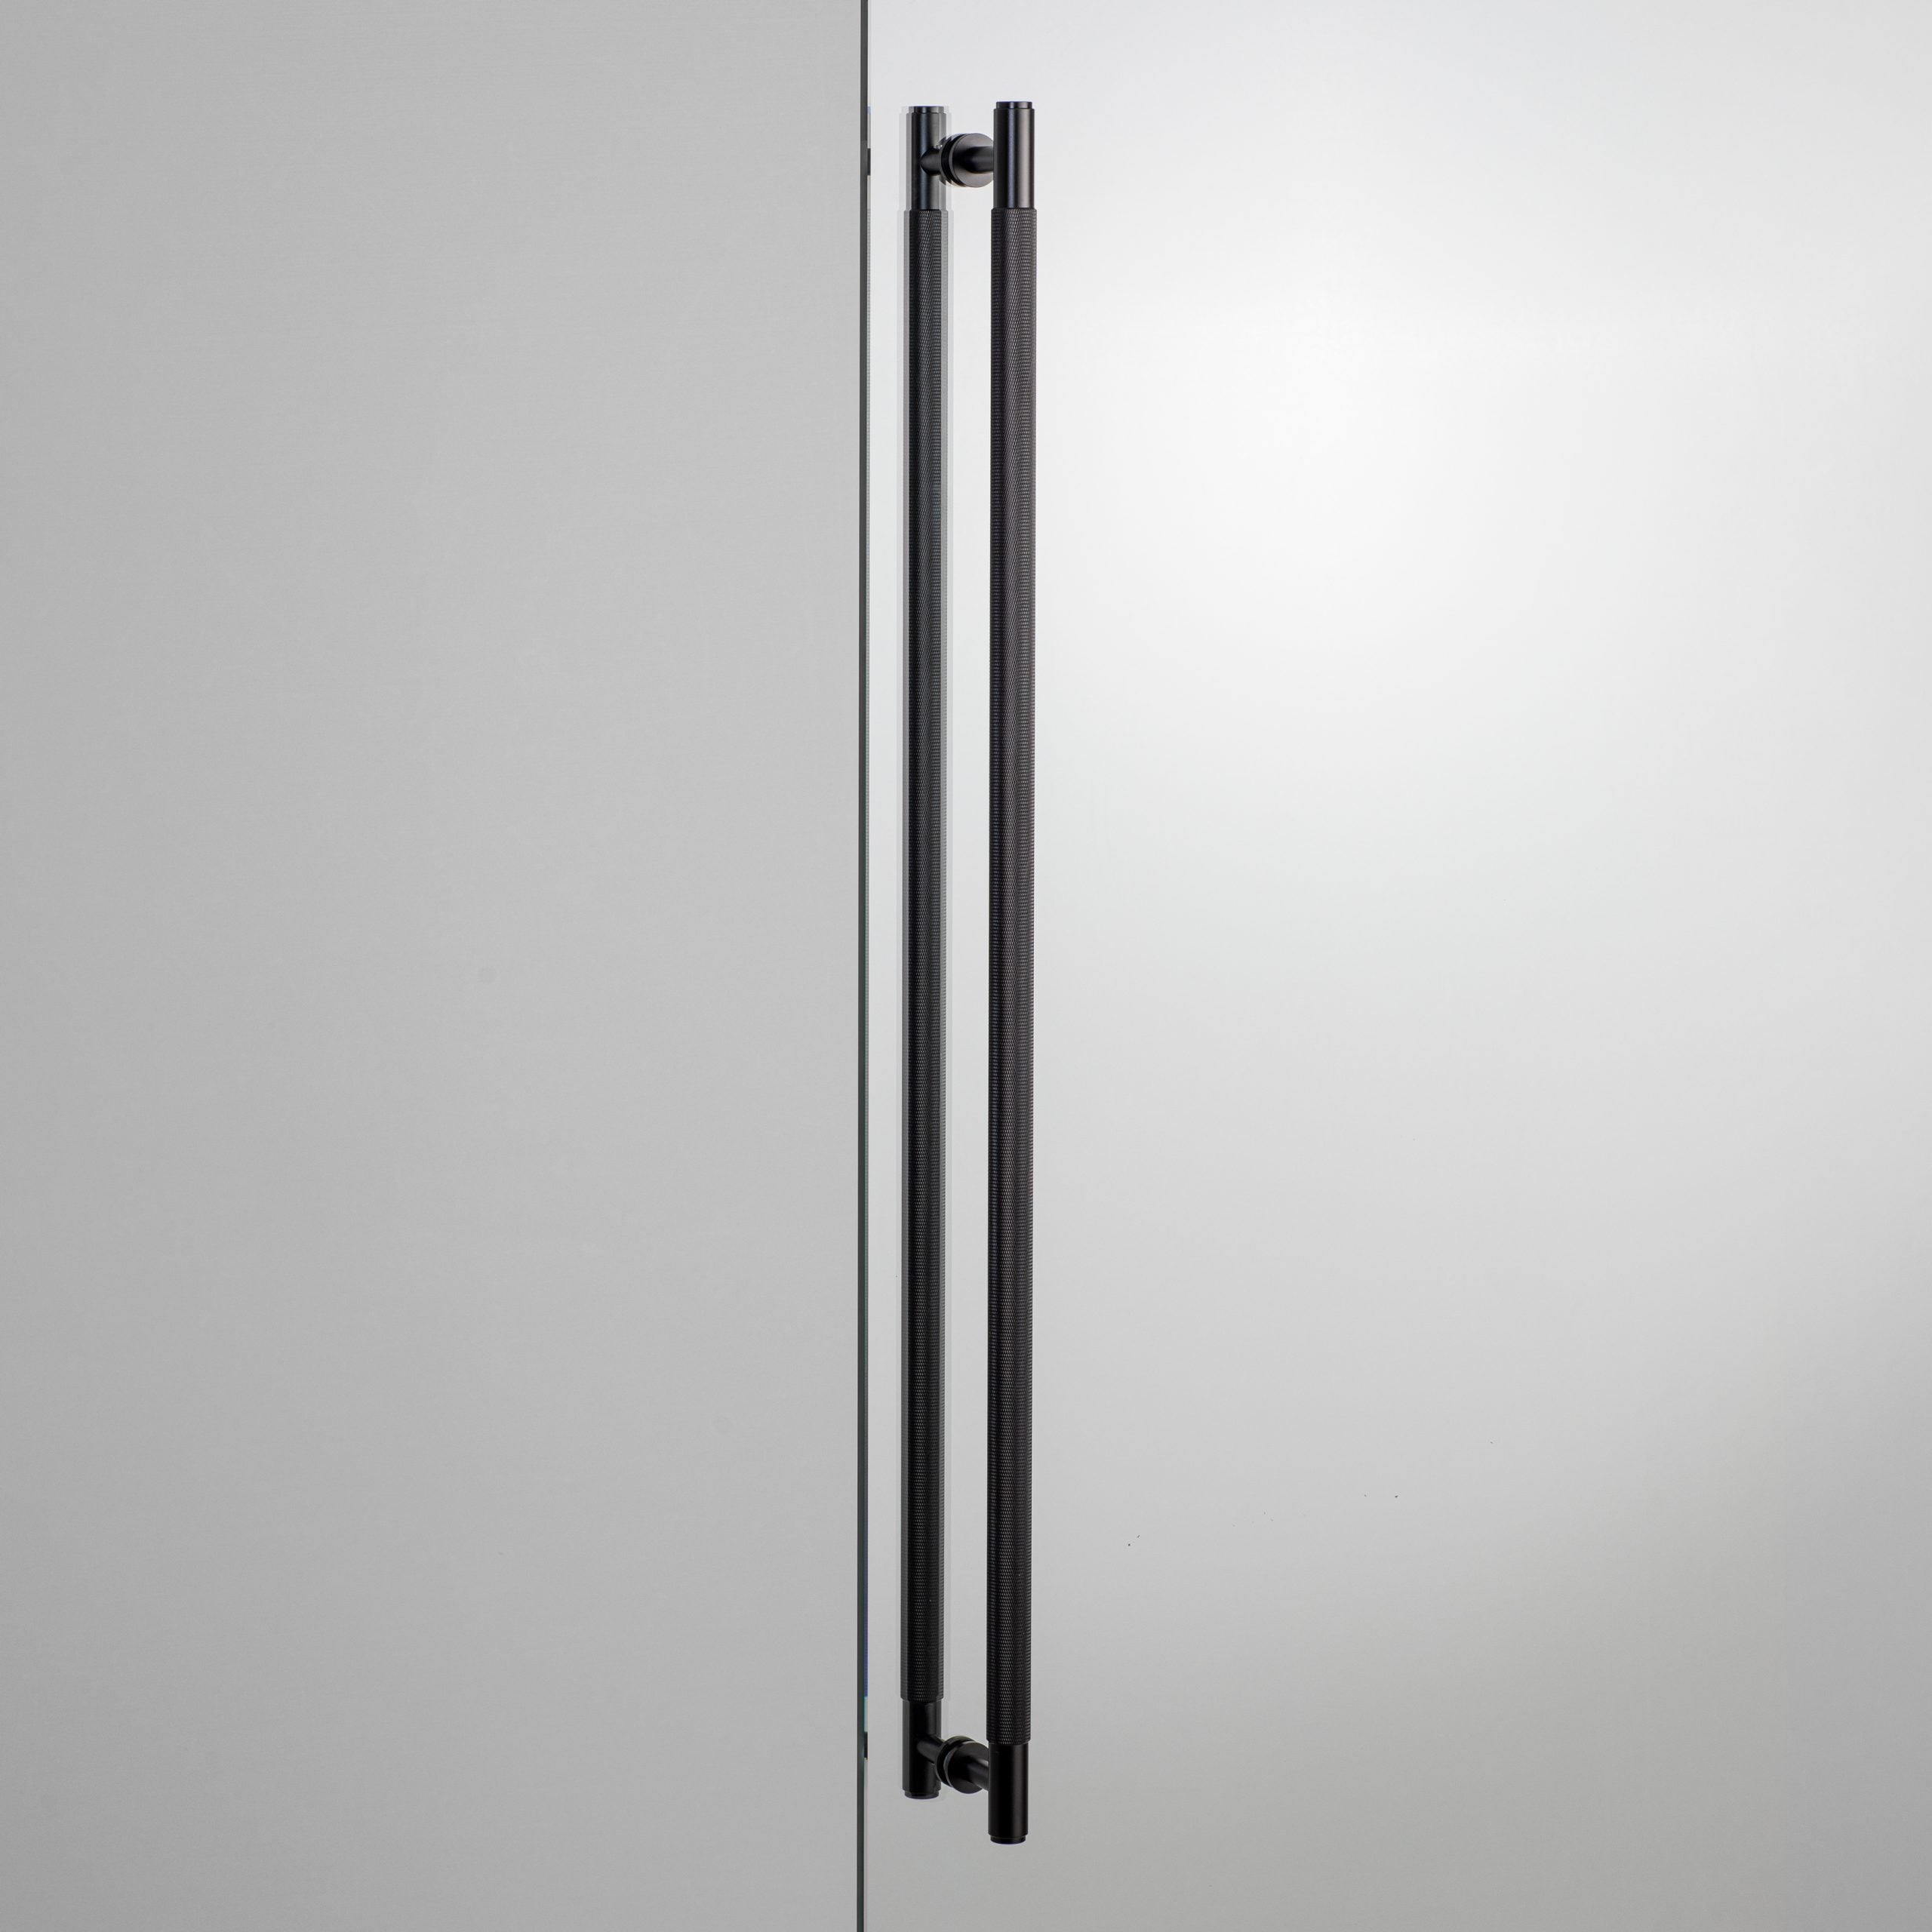 Buster + Punch 30.5 inch Double-sided Cross Knurl Closet Bar Hardware Buster + Punch Black  